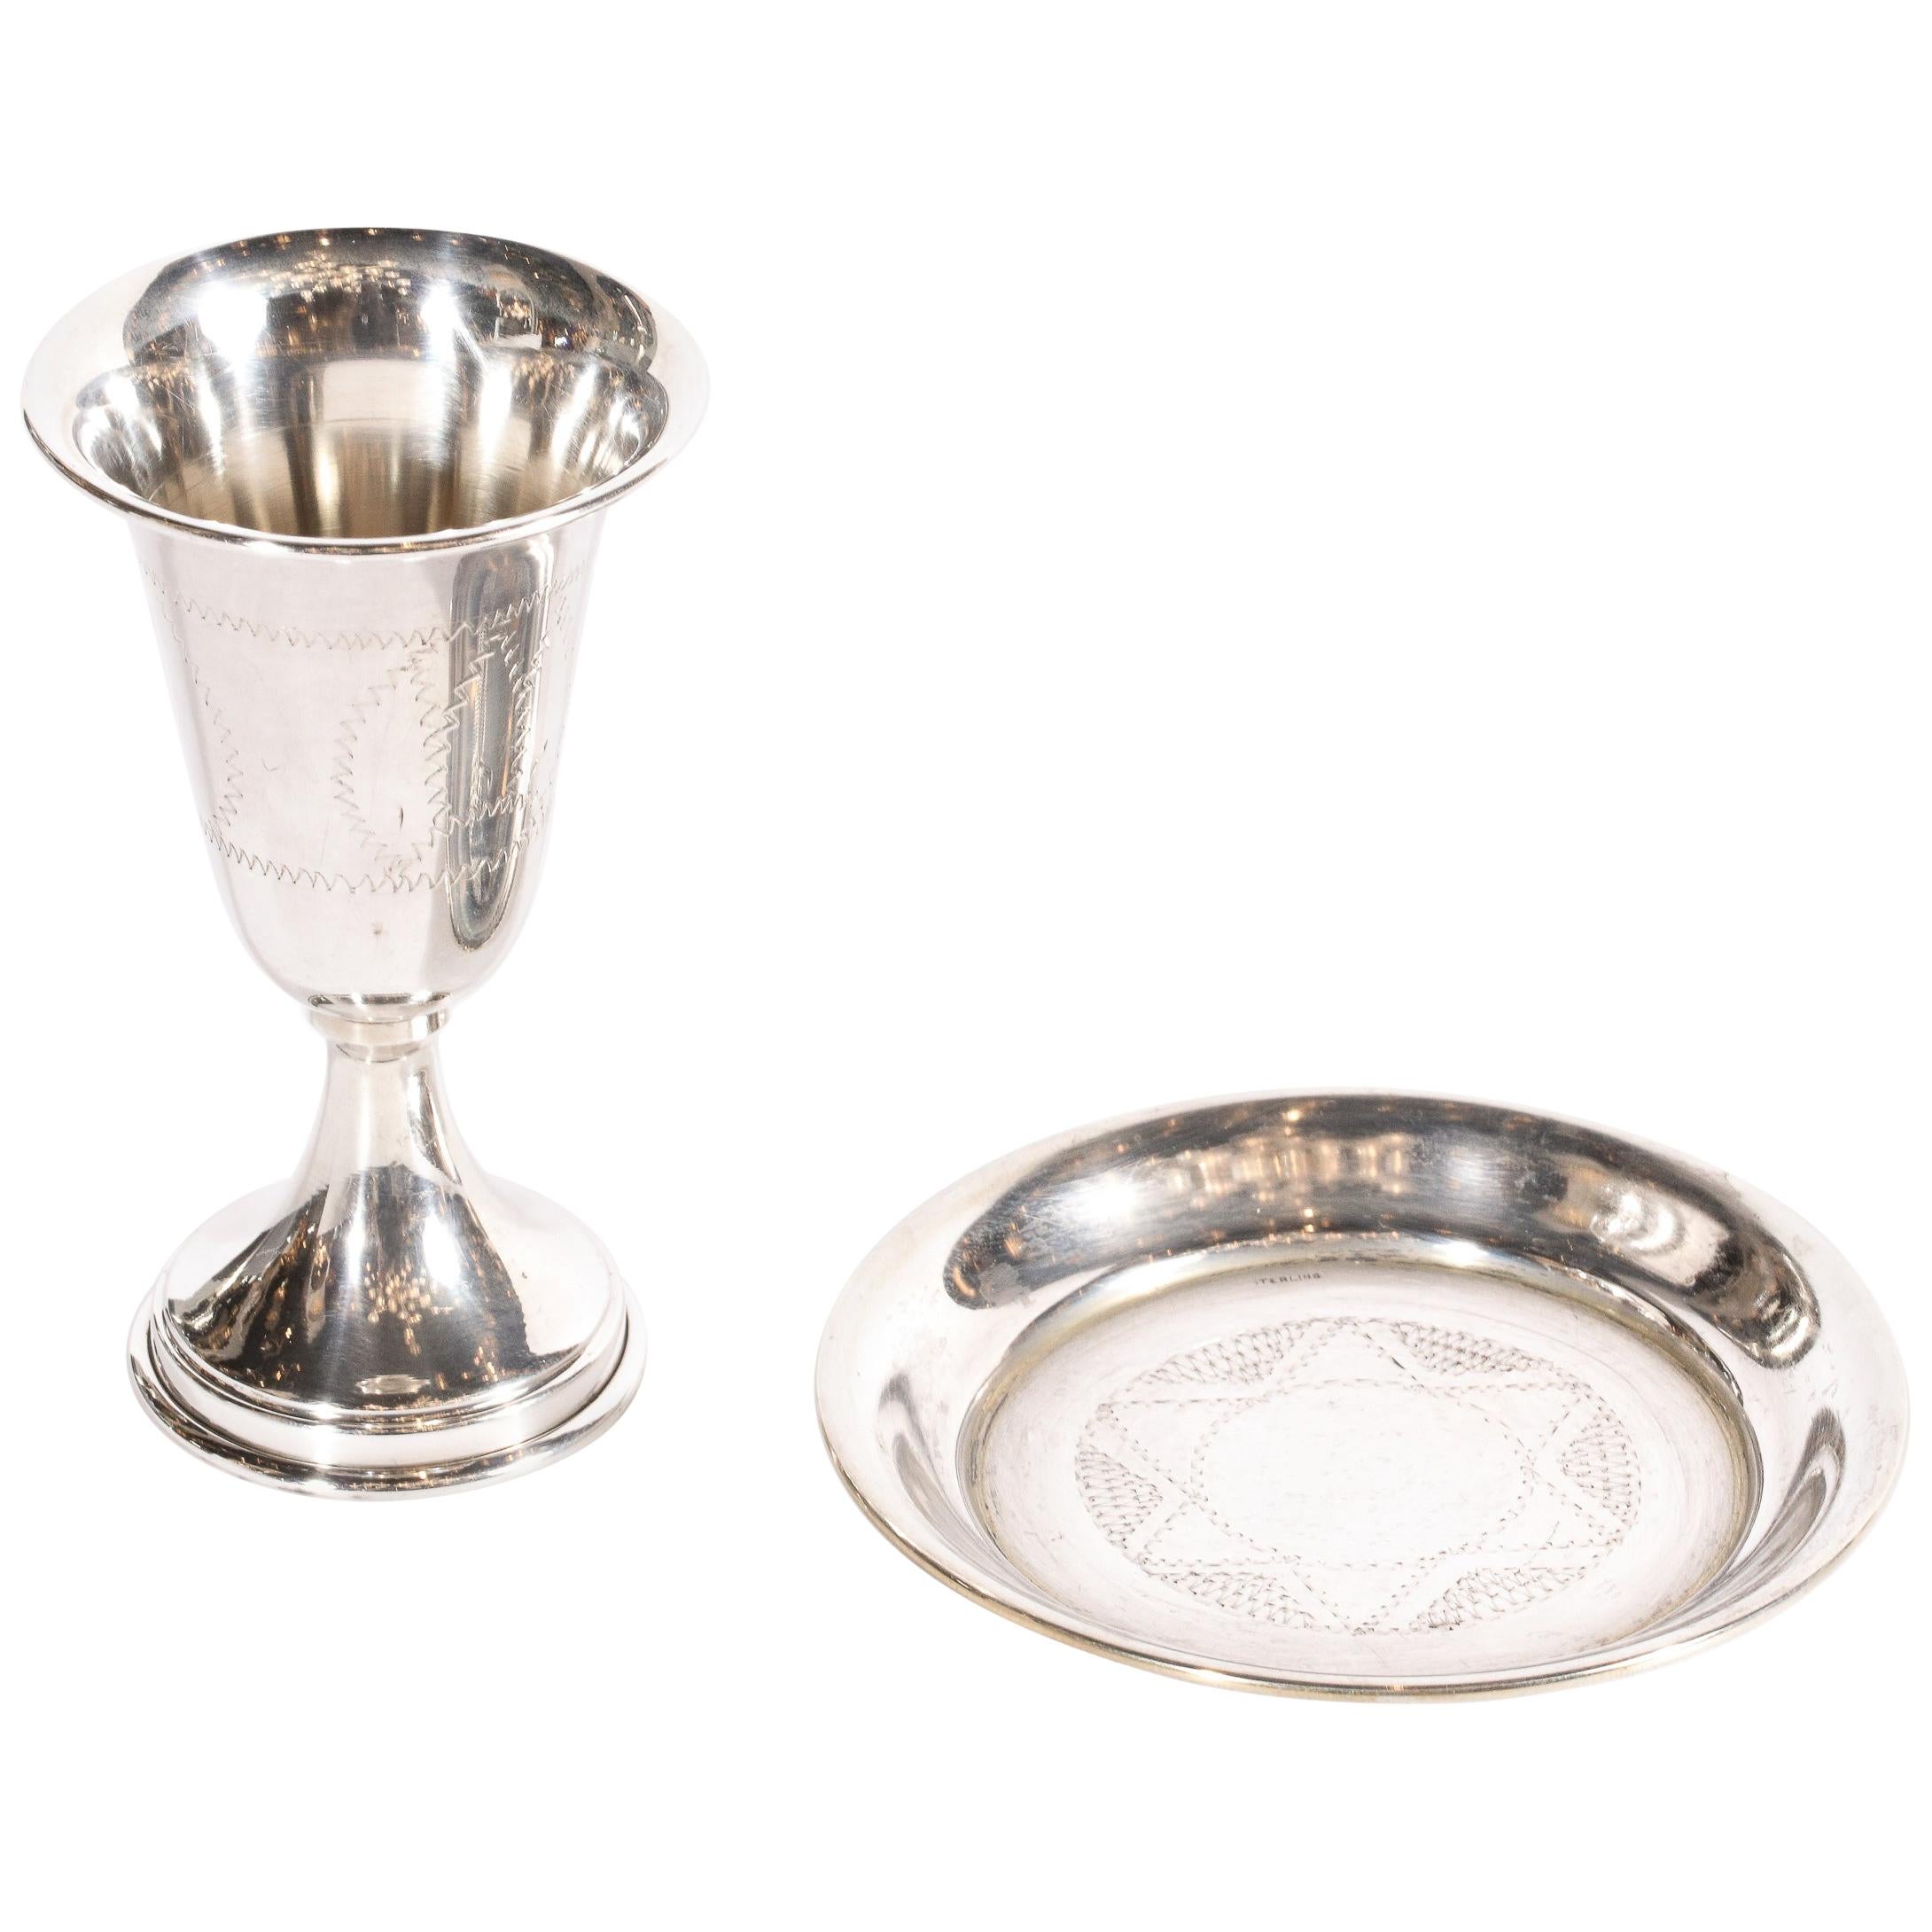 Eastern Sterling Company Sterling Silver Kiddush Goblet Cup & Charger